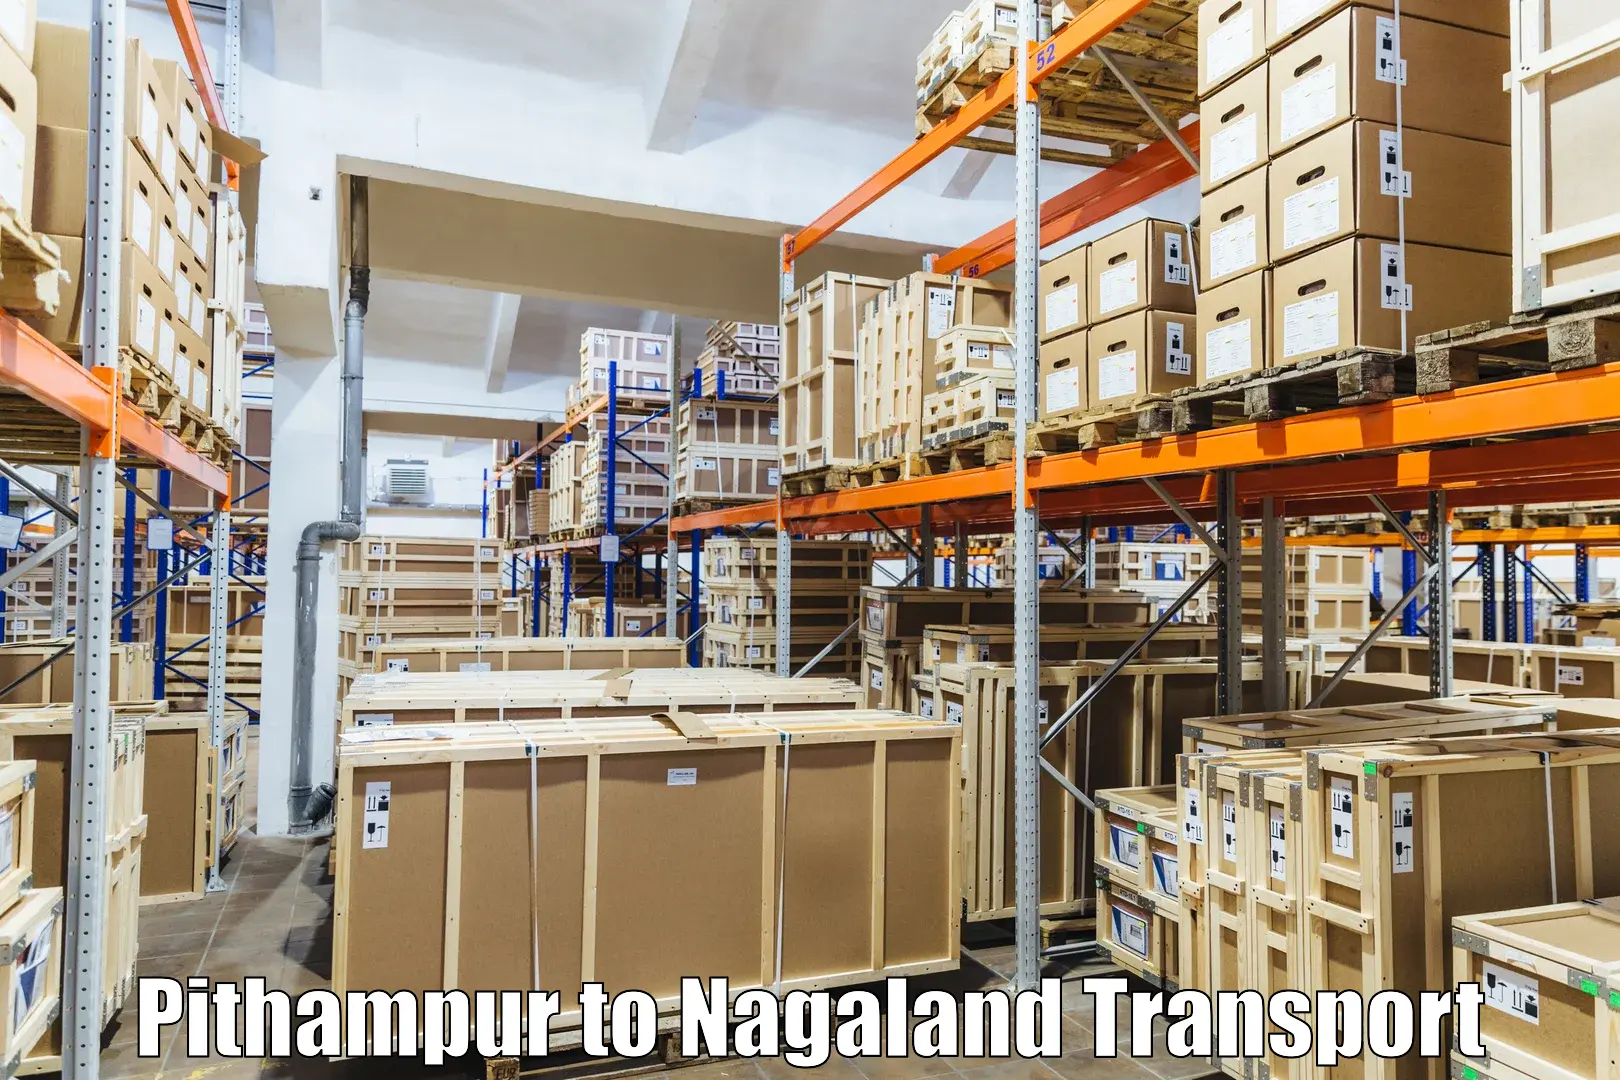 Daily transport service in Pithampur to Nagaland